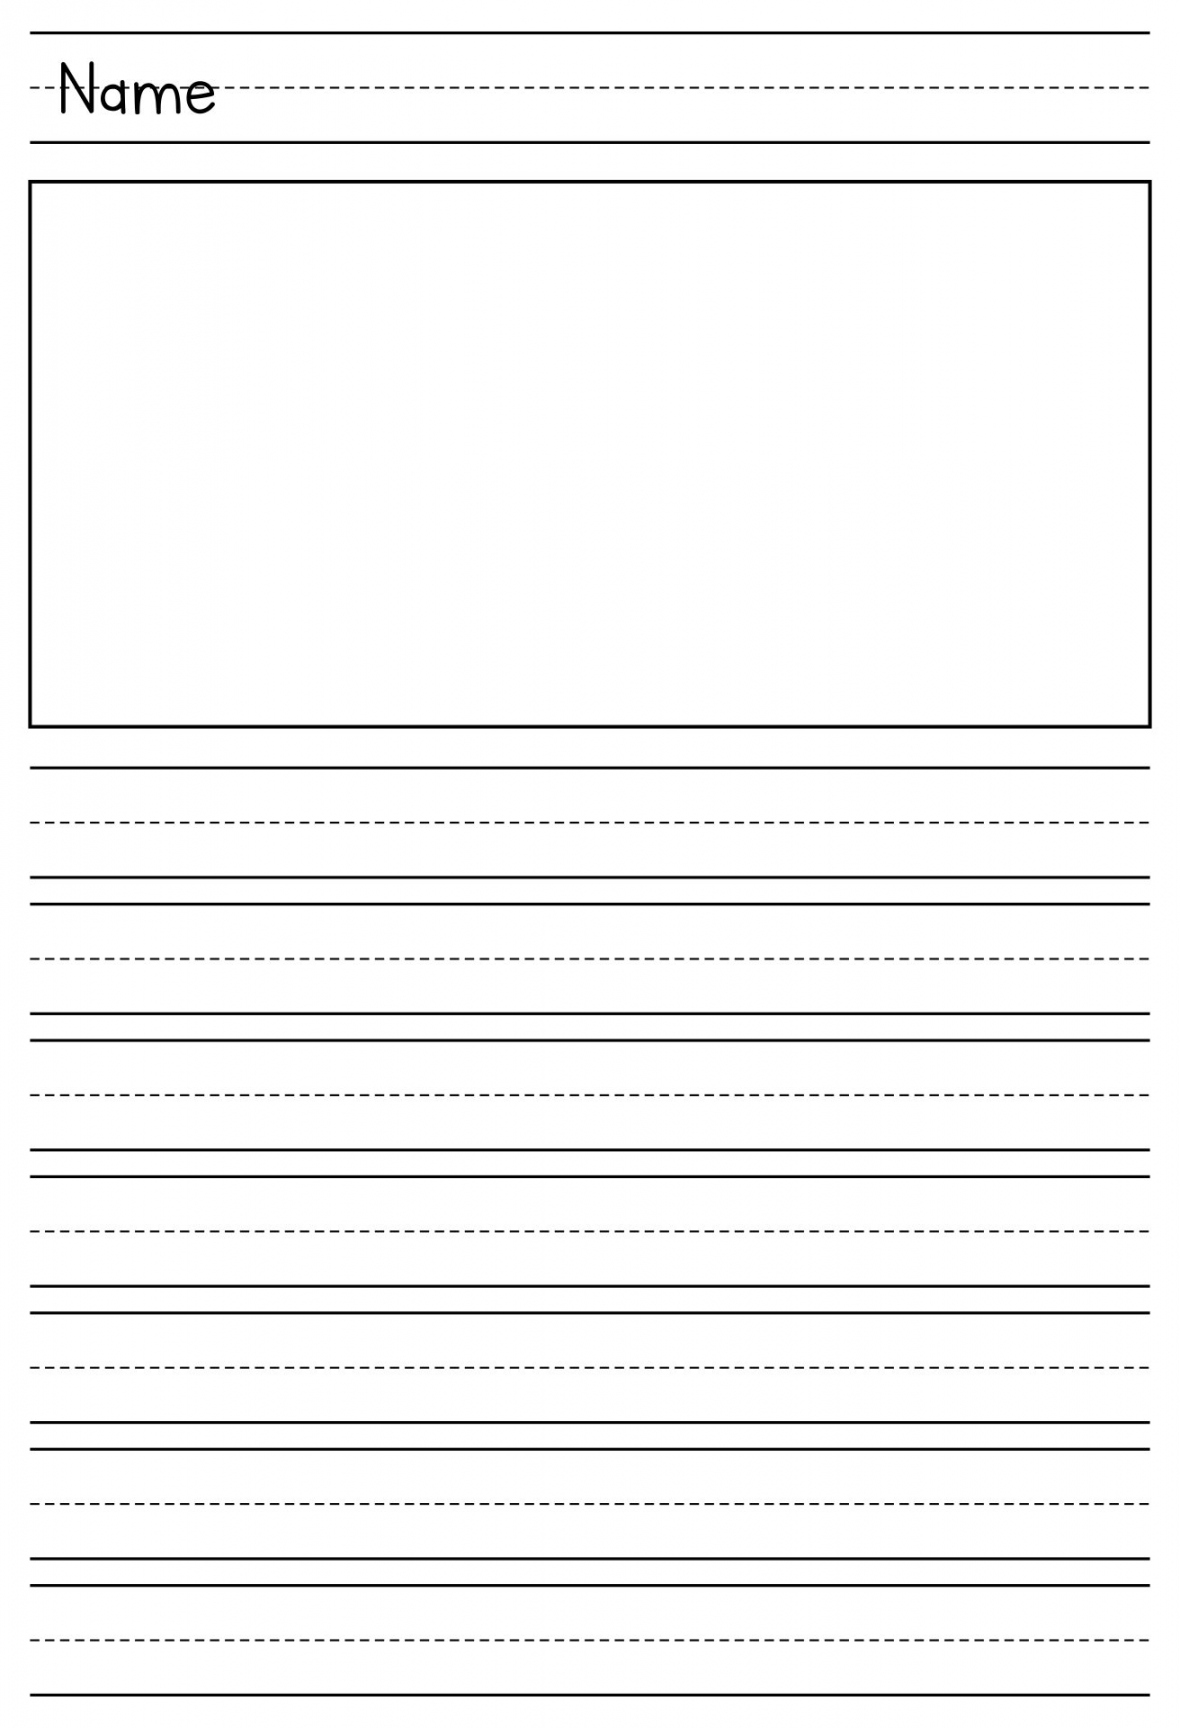 Best Printable Primary Writing Paper Template - printablee - Primary Writing Paper Printable